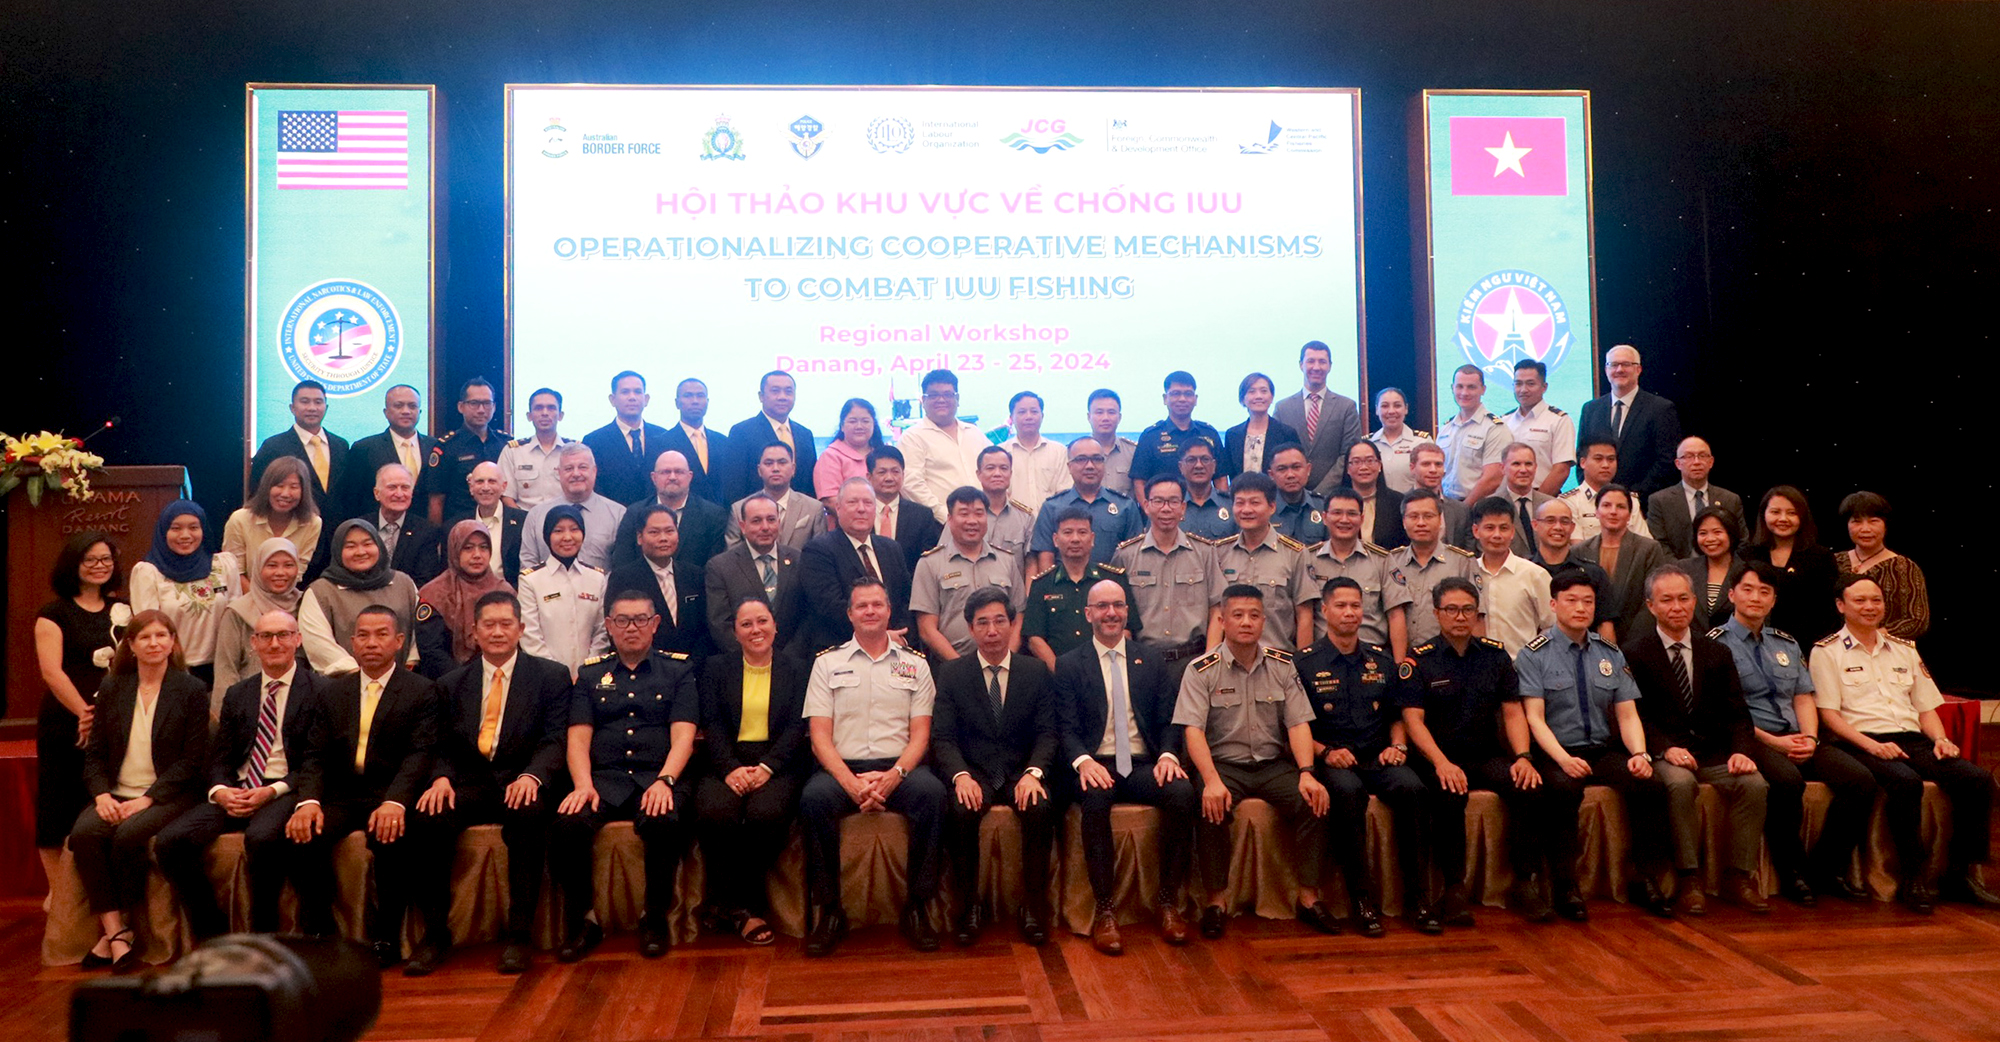 The conference is attended by more than 70 international delegates and experts in the field of fisheries law enforcement from 12 countries. Photo: VAN HOANG